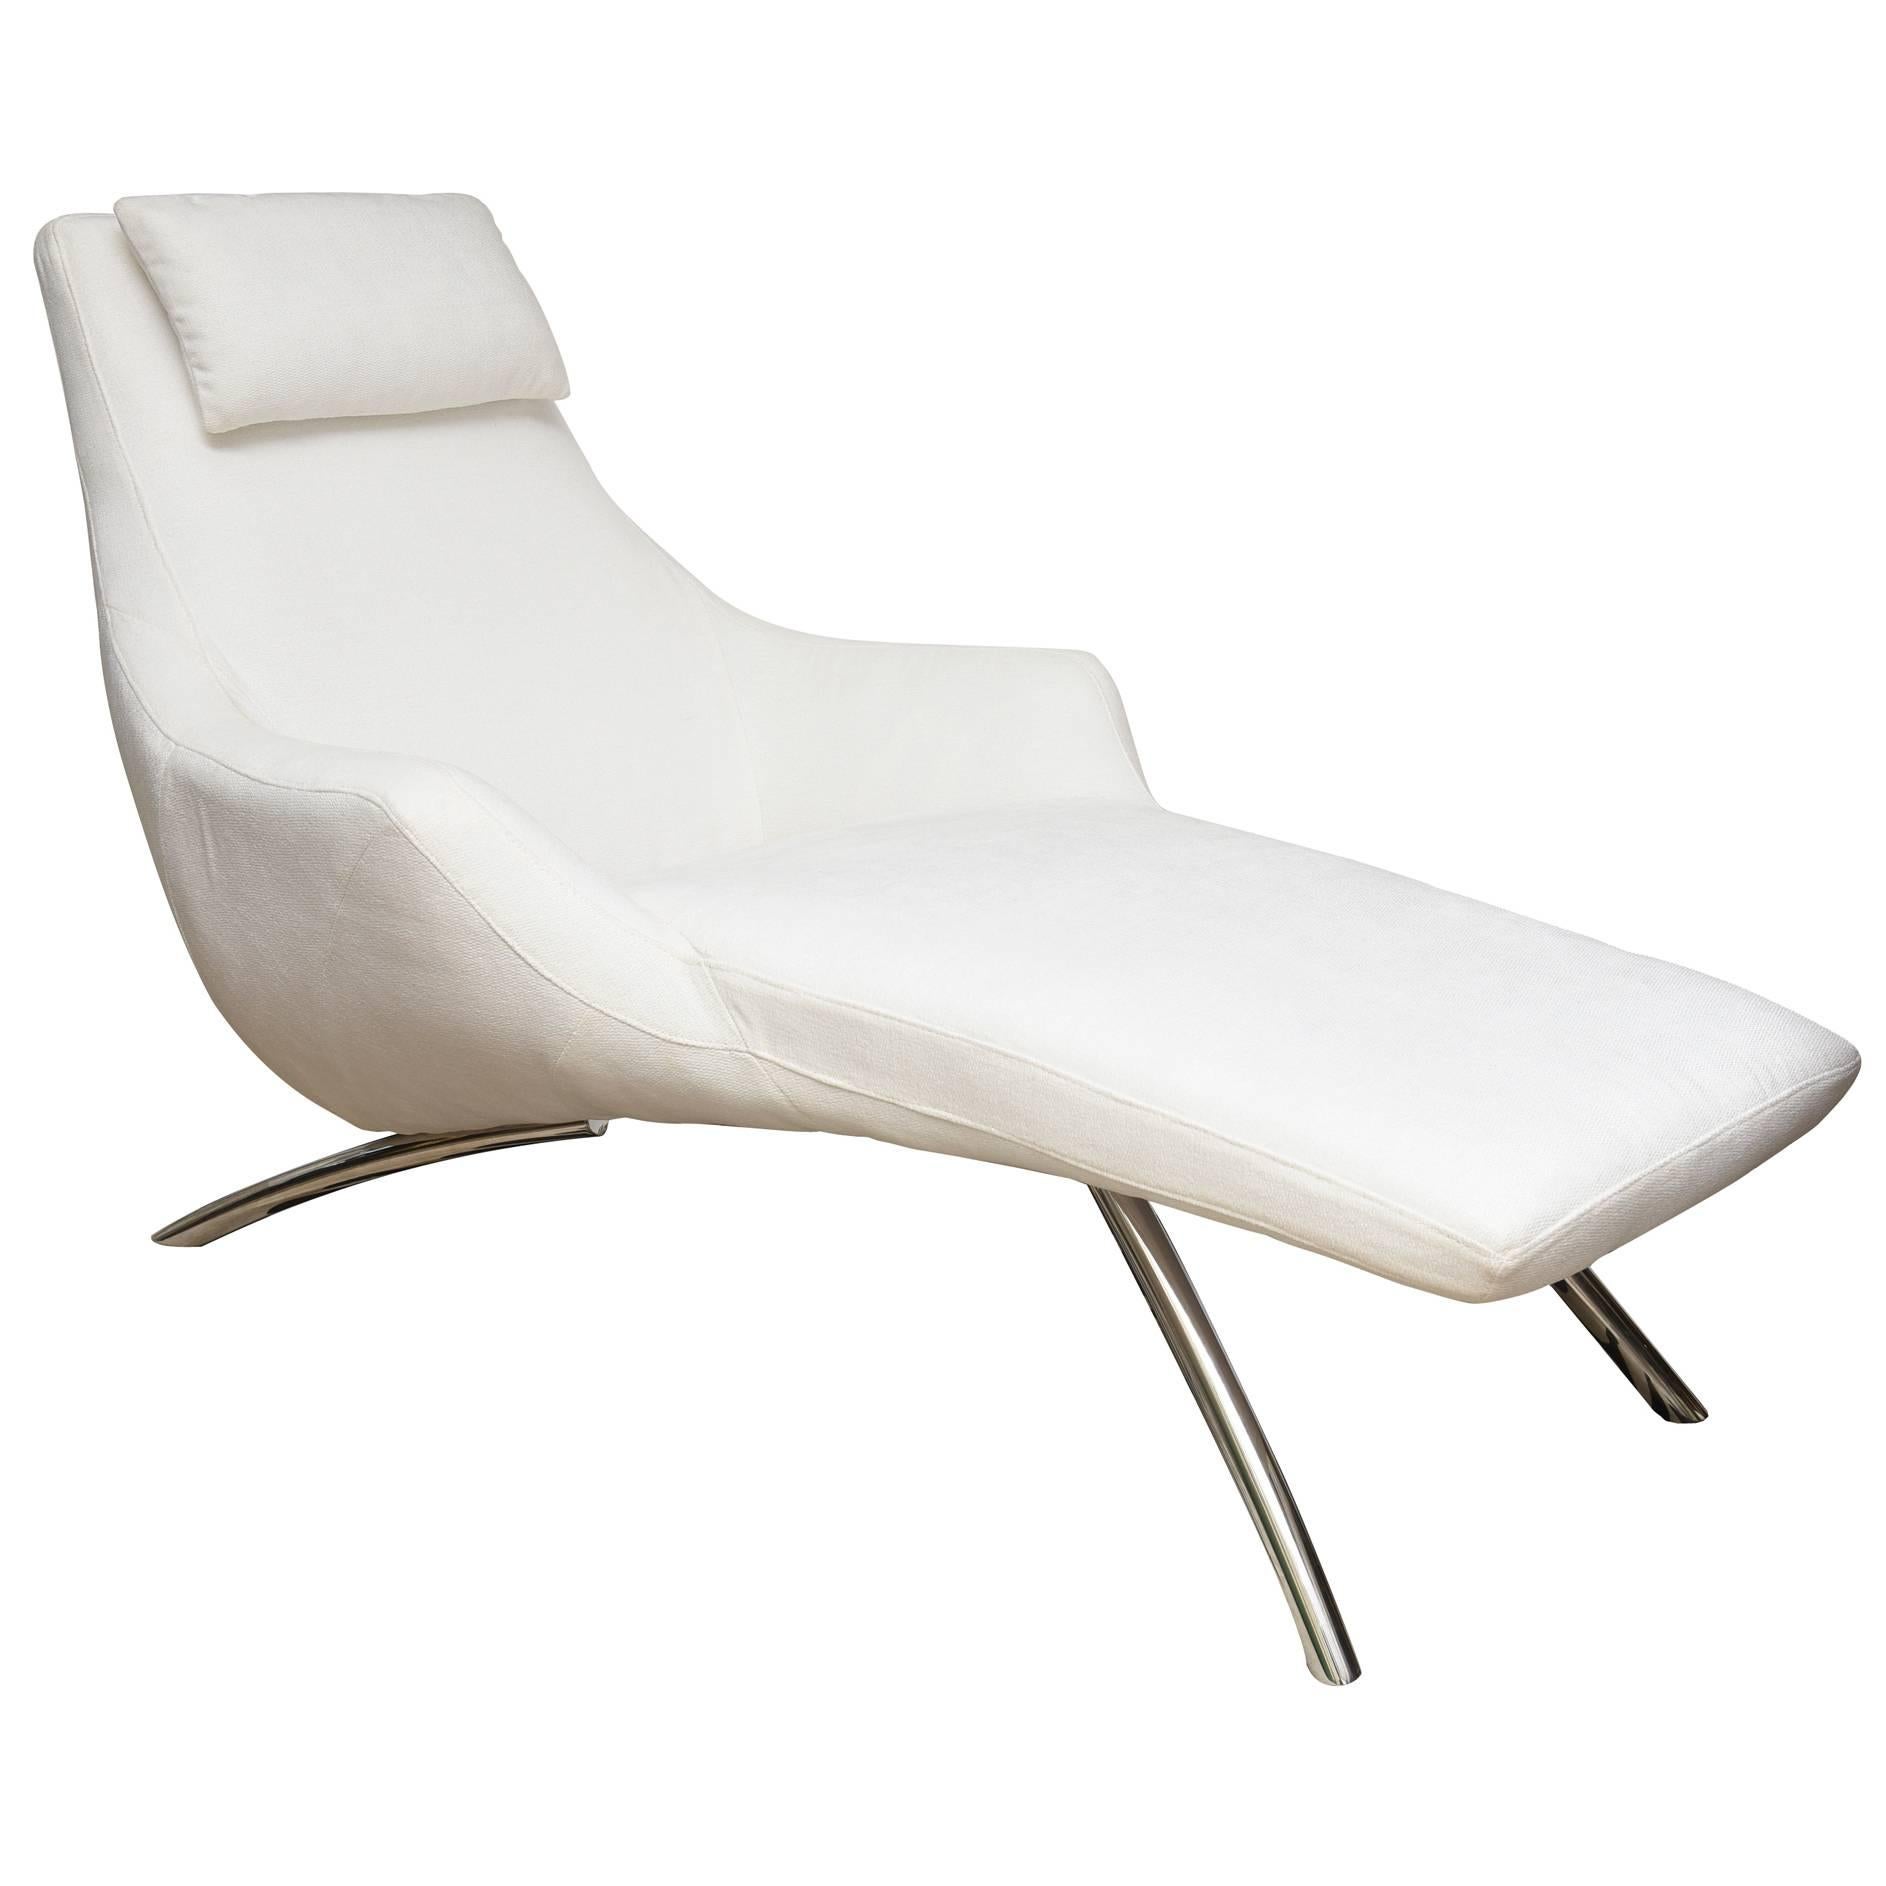 Moderne Sculptural Stainless Steel and Upholstered Kagan Style Chaise Lounge